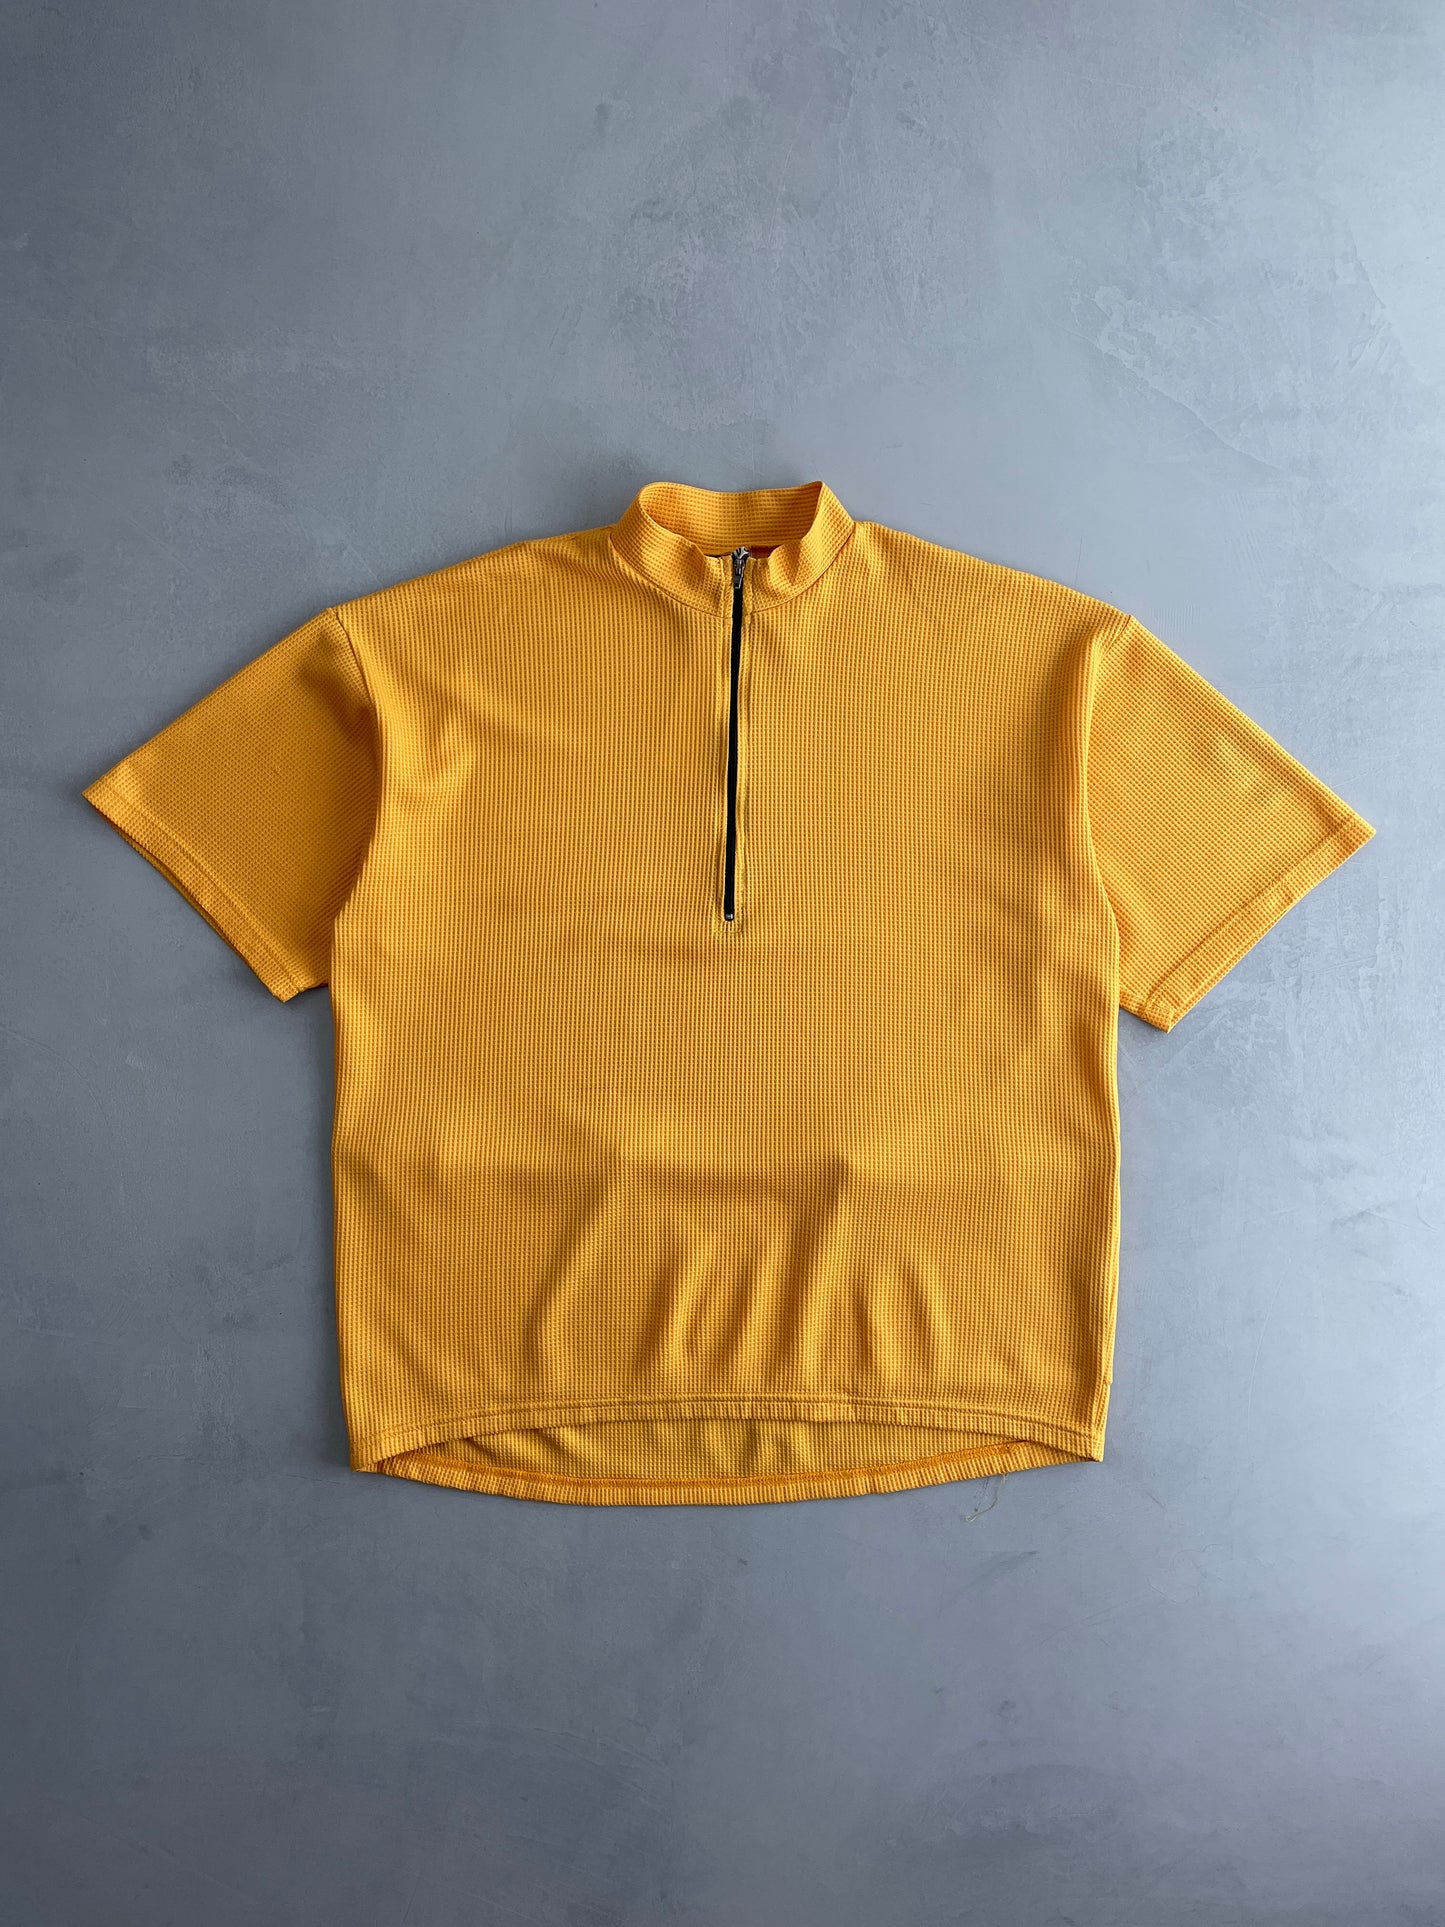 Hot n Wild Cycling Jersey [L]